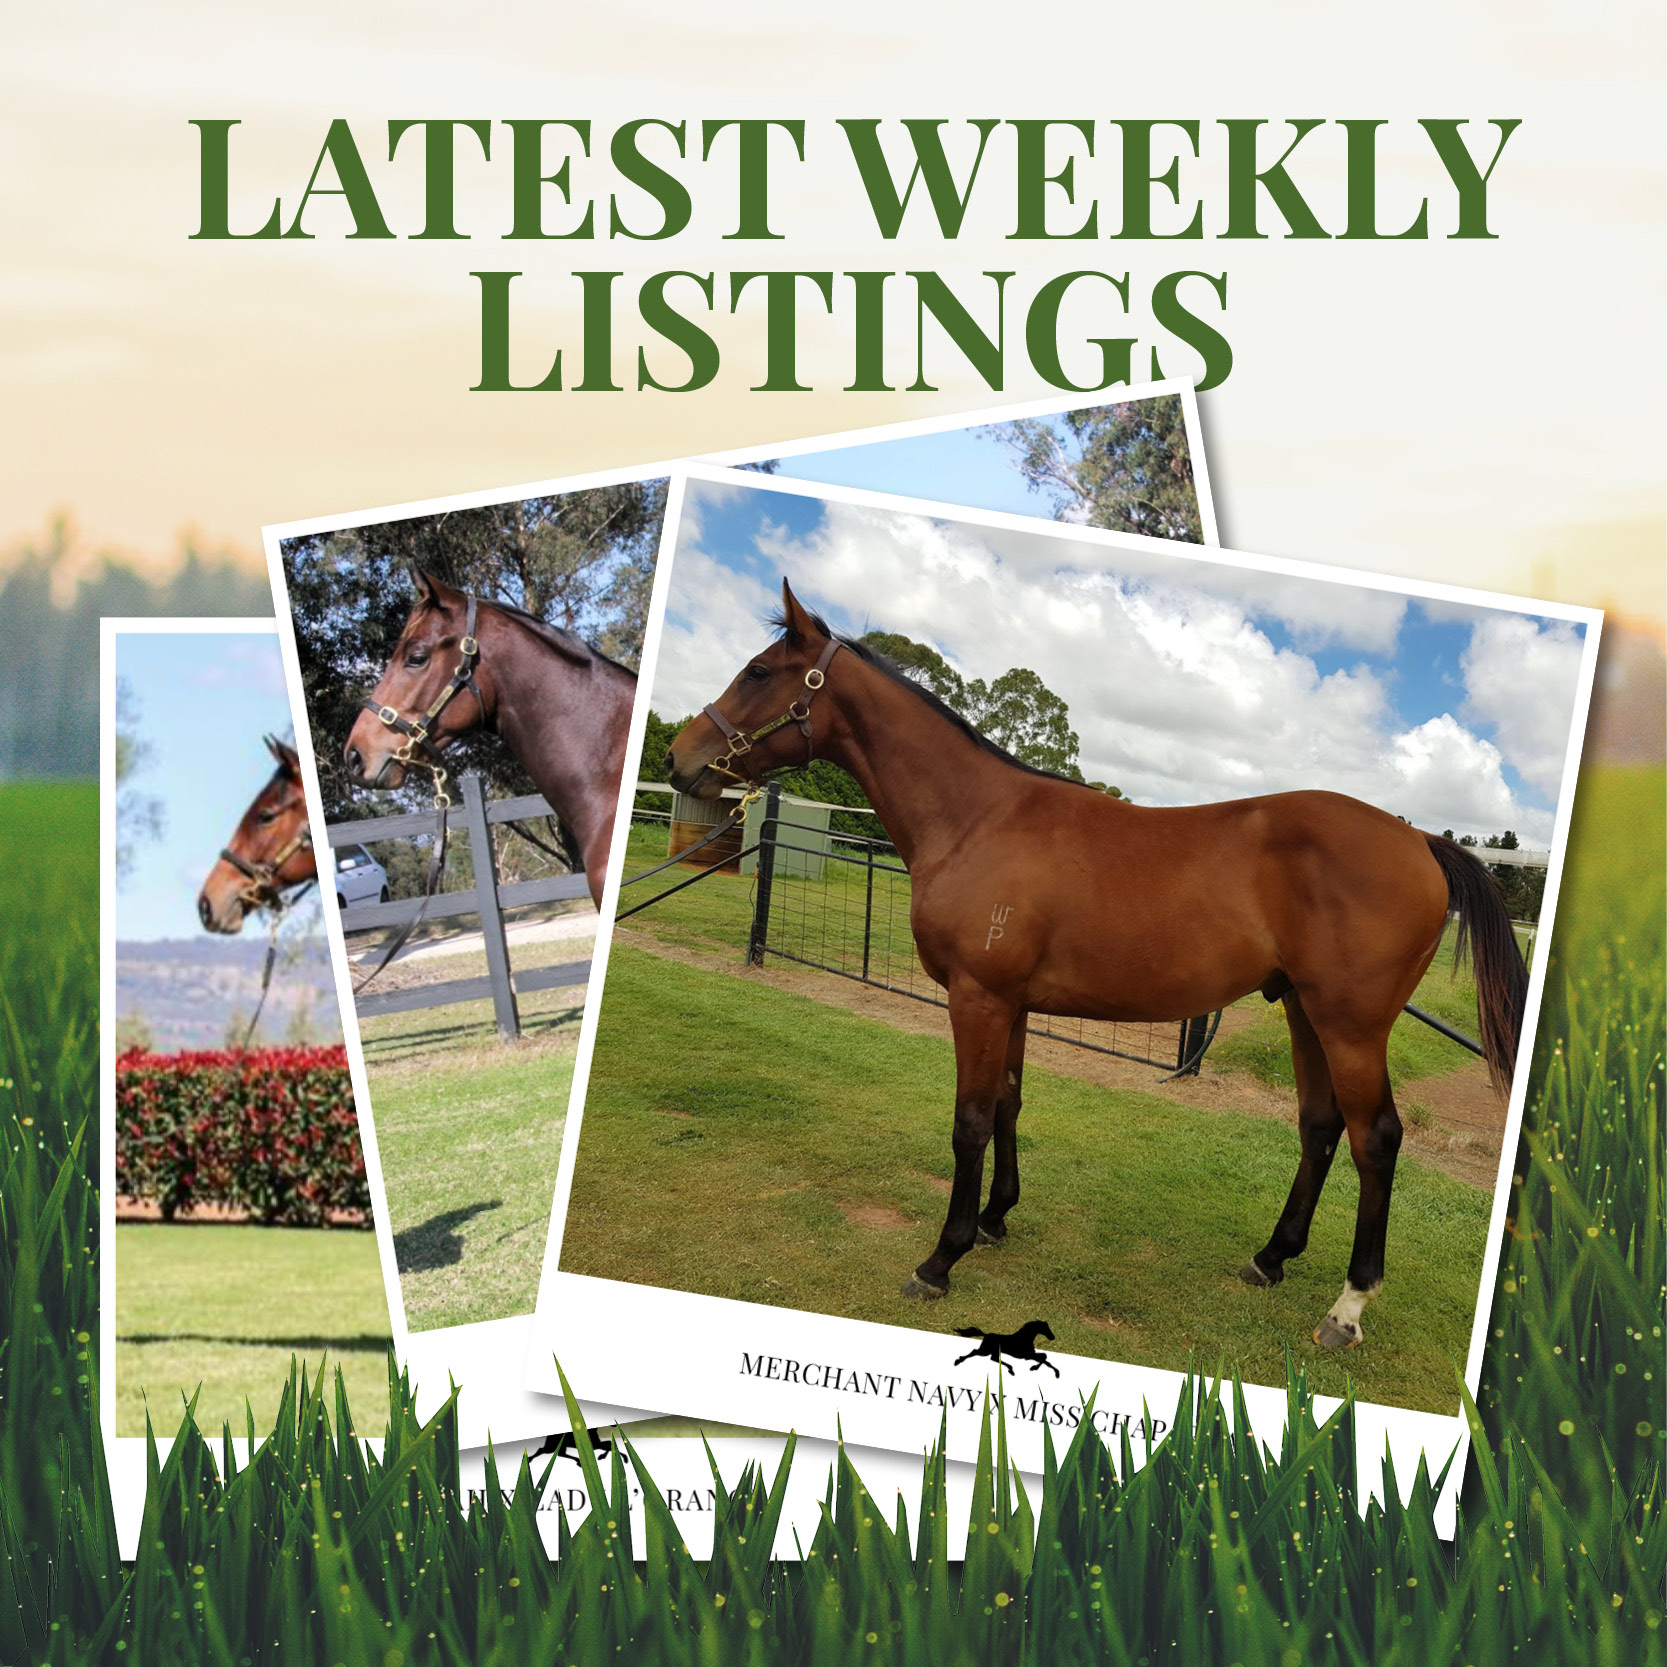 Latest Weekly Listings – Merchant Navy, Charge Forward and Pariah